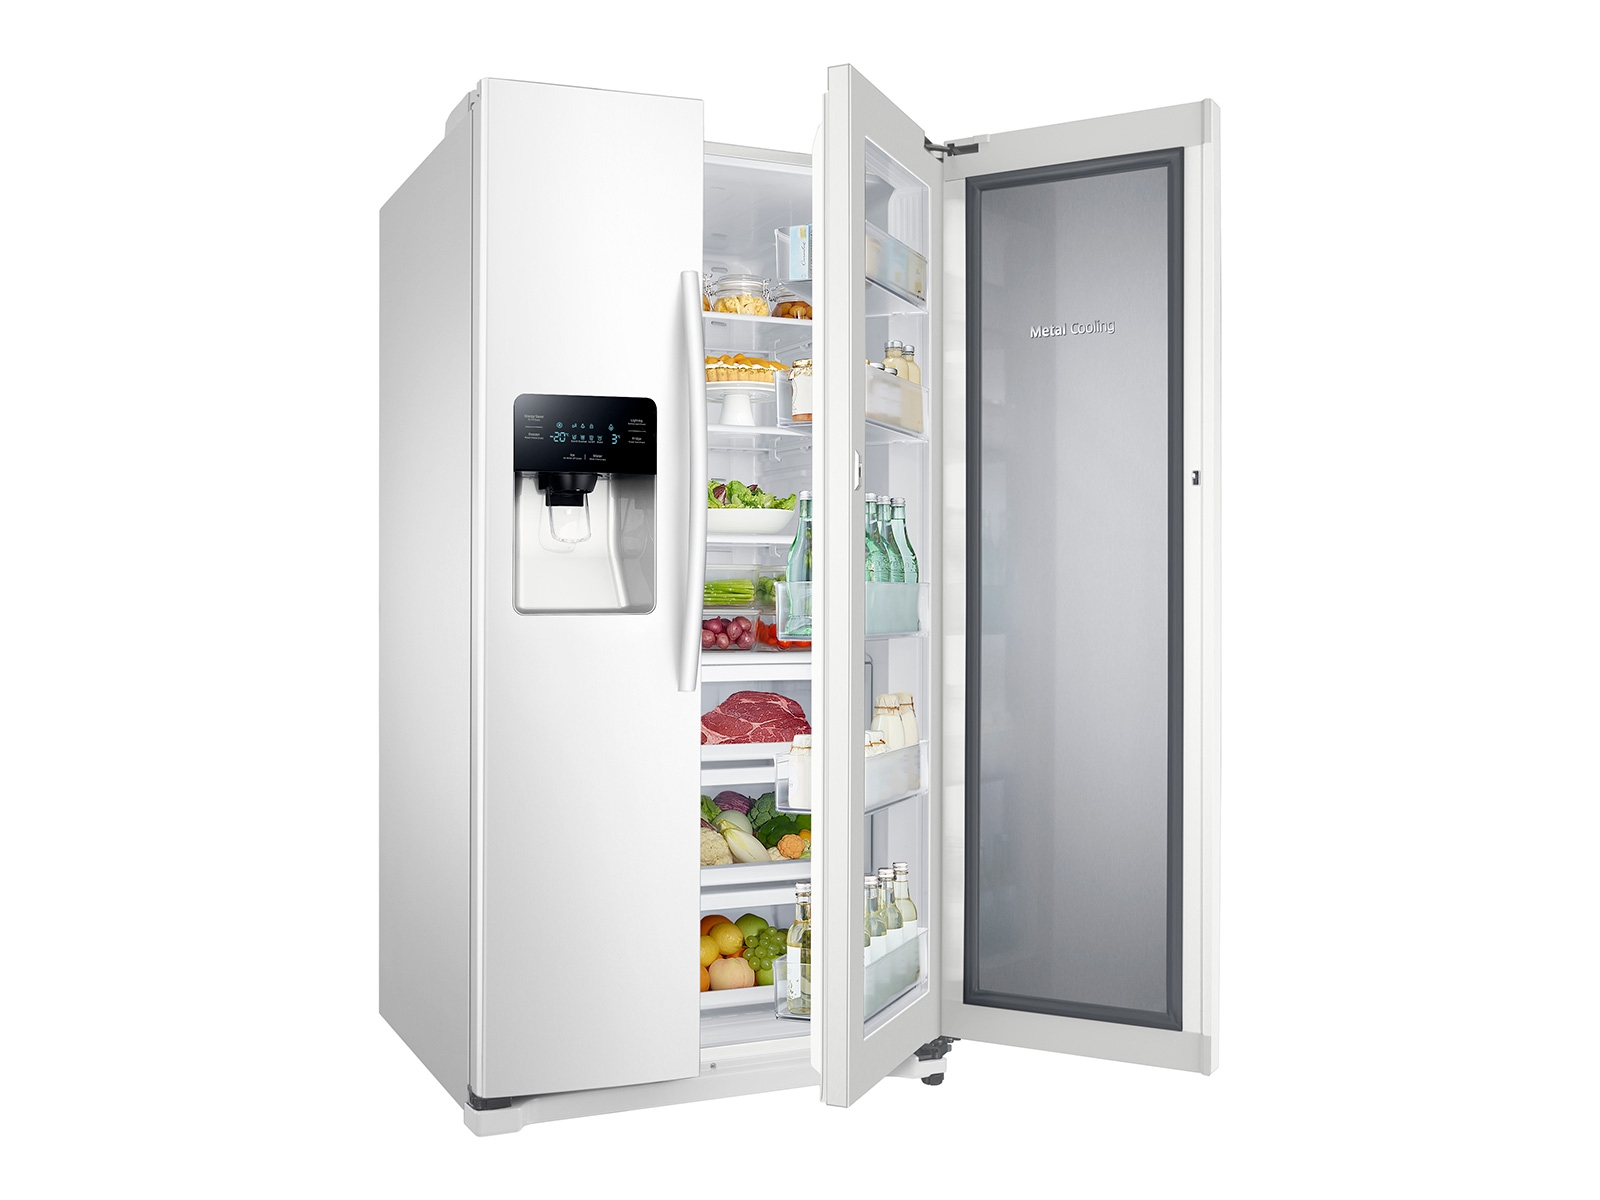 https://image-us.samsung.com/SamsungUS/home/home-appliances/refrigerators/all/pdp/rh25h5611ww/05_Refrigerator_SideXSide_RH25H5611WW_R-Perspective_Front-Showcase-Incase-Open-With-Food_White.jpg?$product-details-jpg$